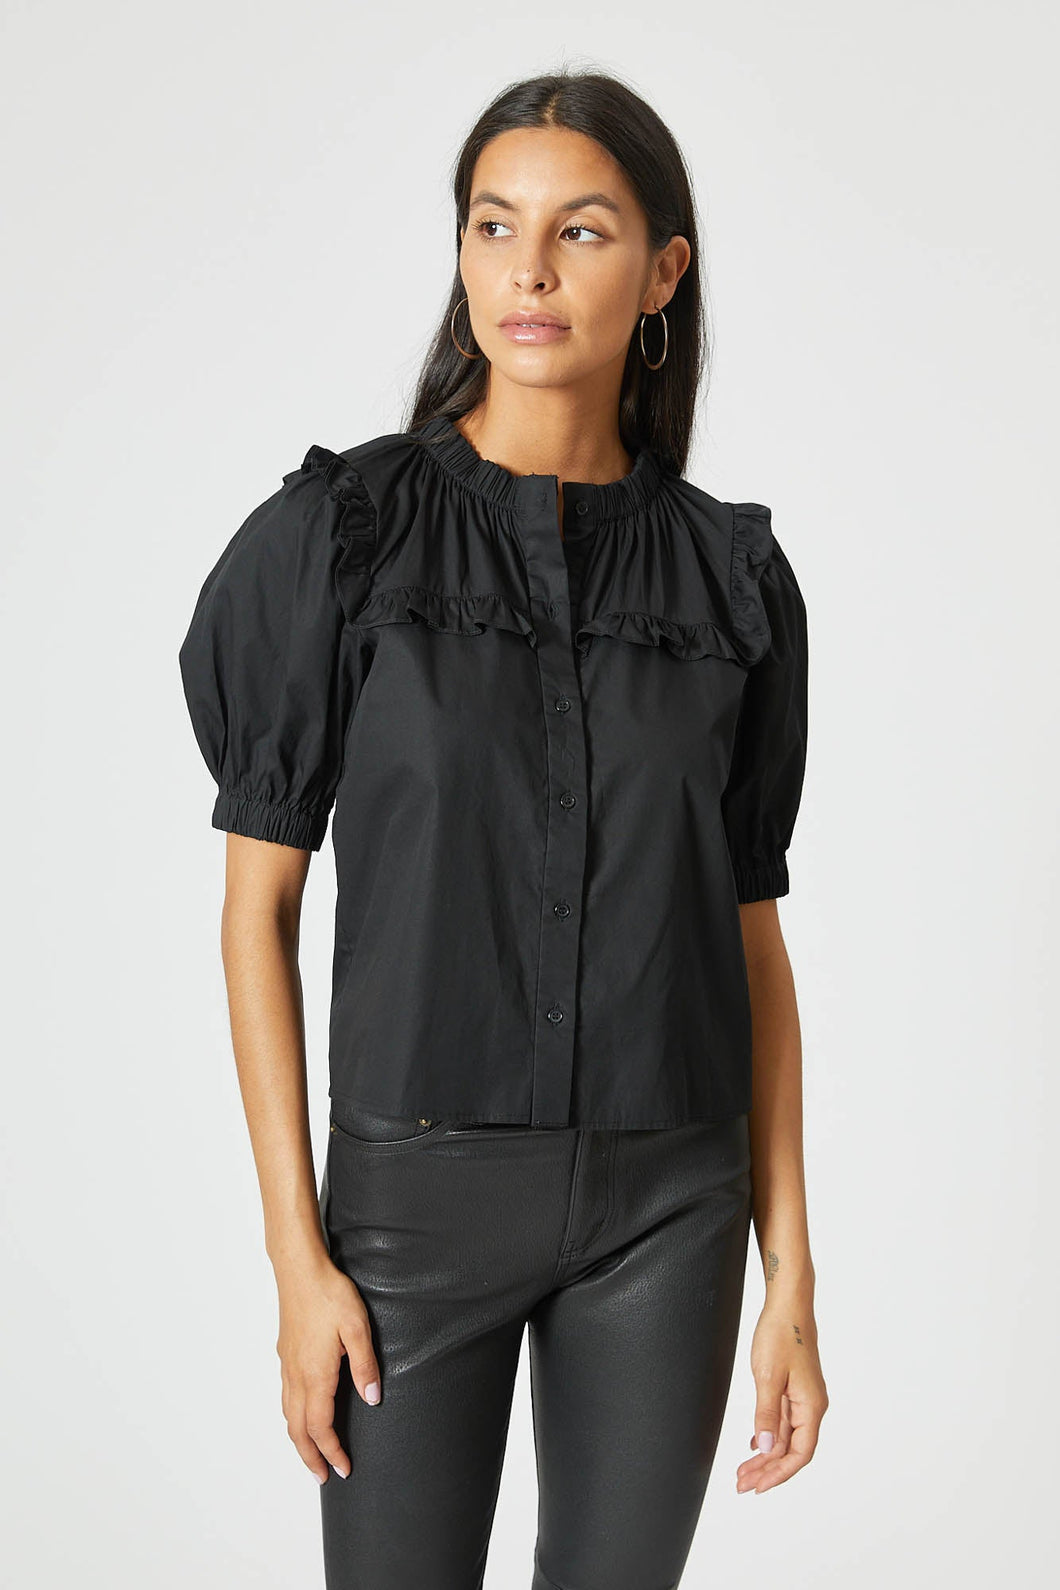 The Courtney Shirt in Black